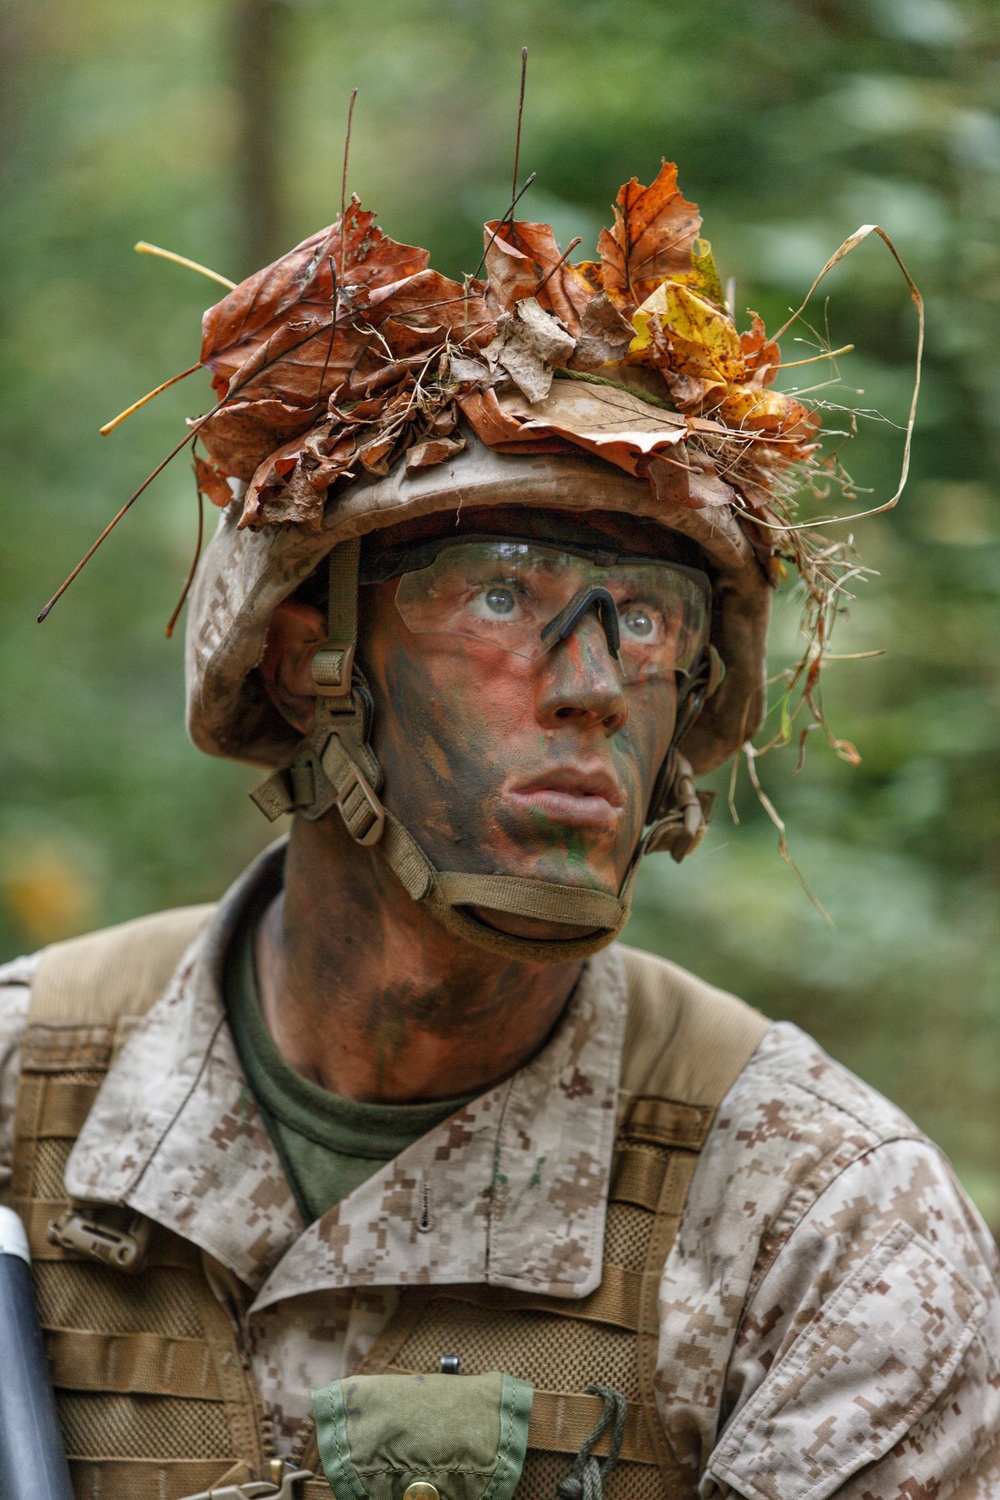 Noah Furbush participates in field exercise at Marine Corps Officer Candidates School